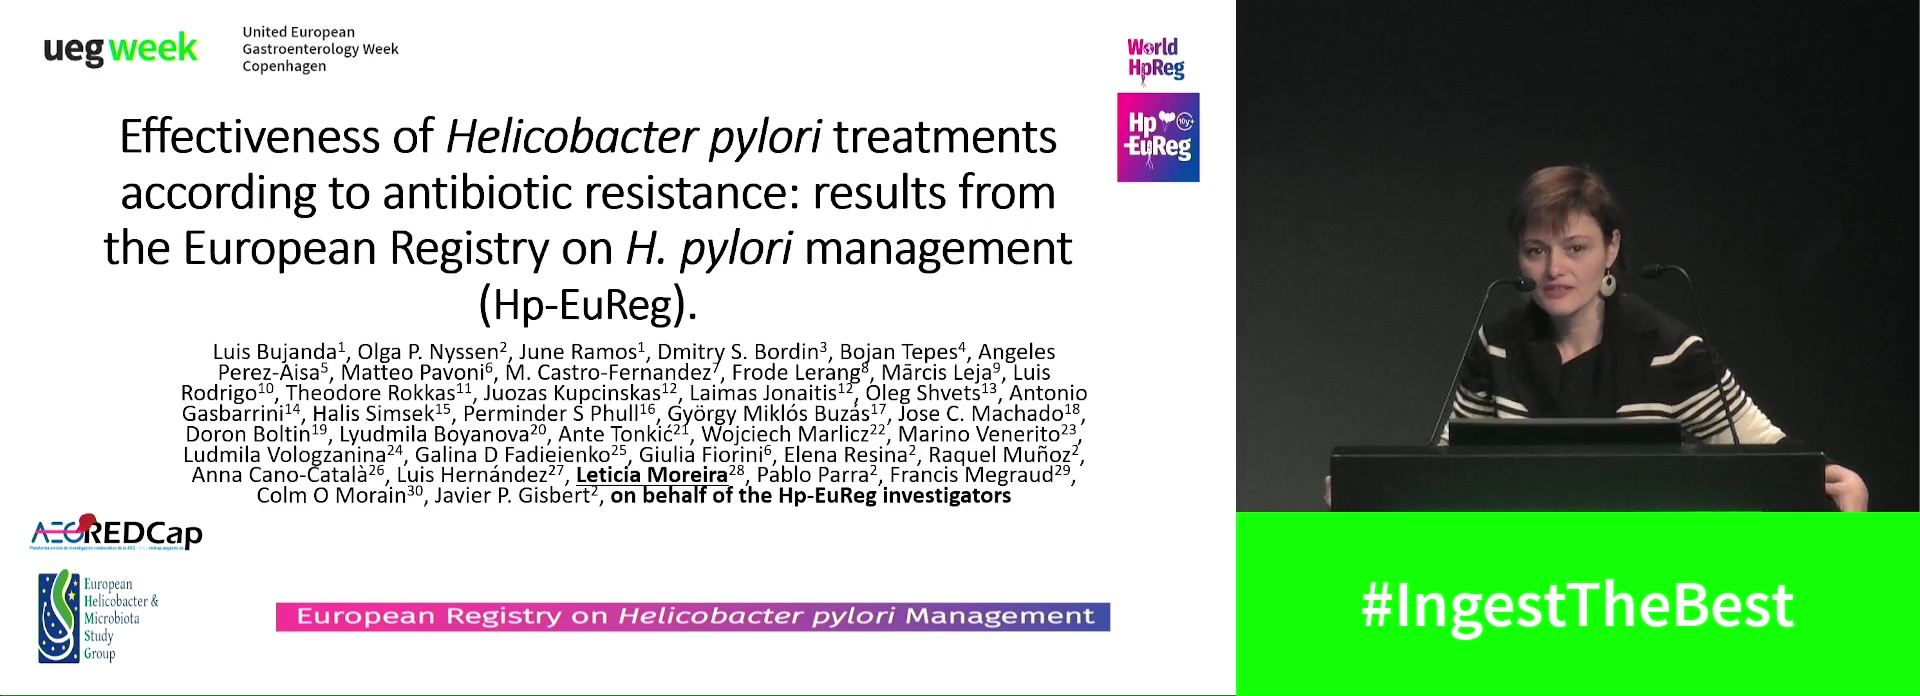 EFFECTIVENESS OF HELICOBACTER PYLORI TREATMENTS ACCORDING TO ANTIBIOTIC RESISTANCE: RESULTS FROM THE EUROPEAN REGISTRY ON H. PYLORI MANAGEMENT (HP-EUREG)